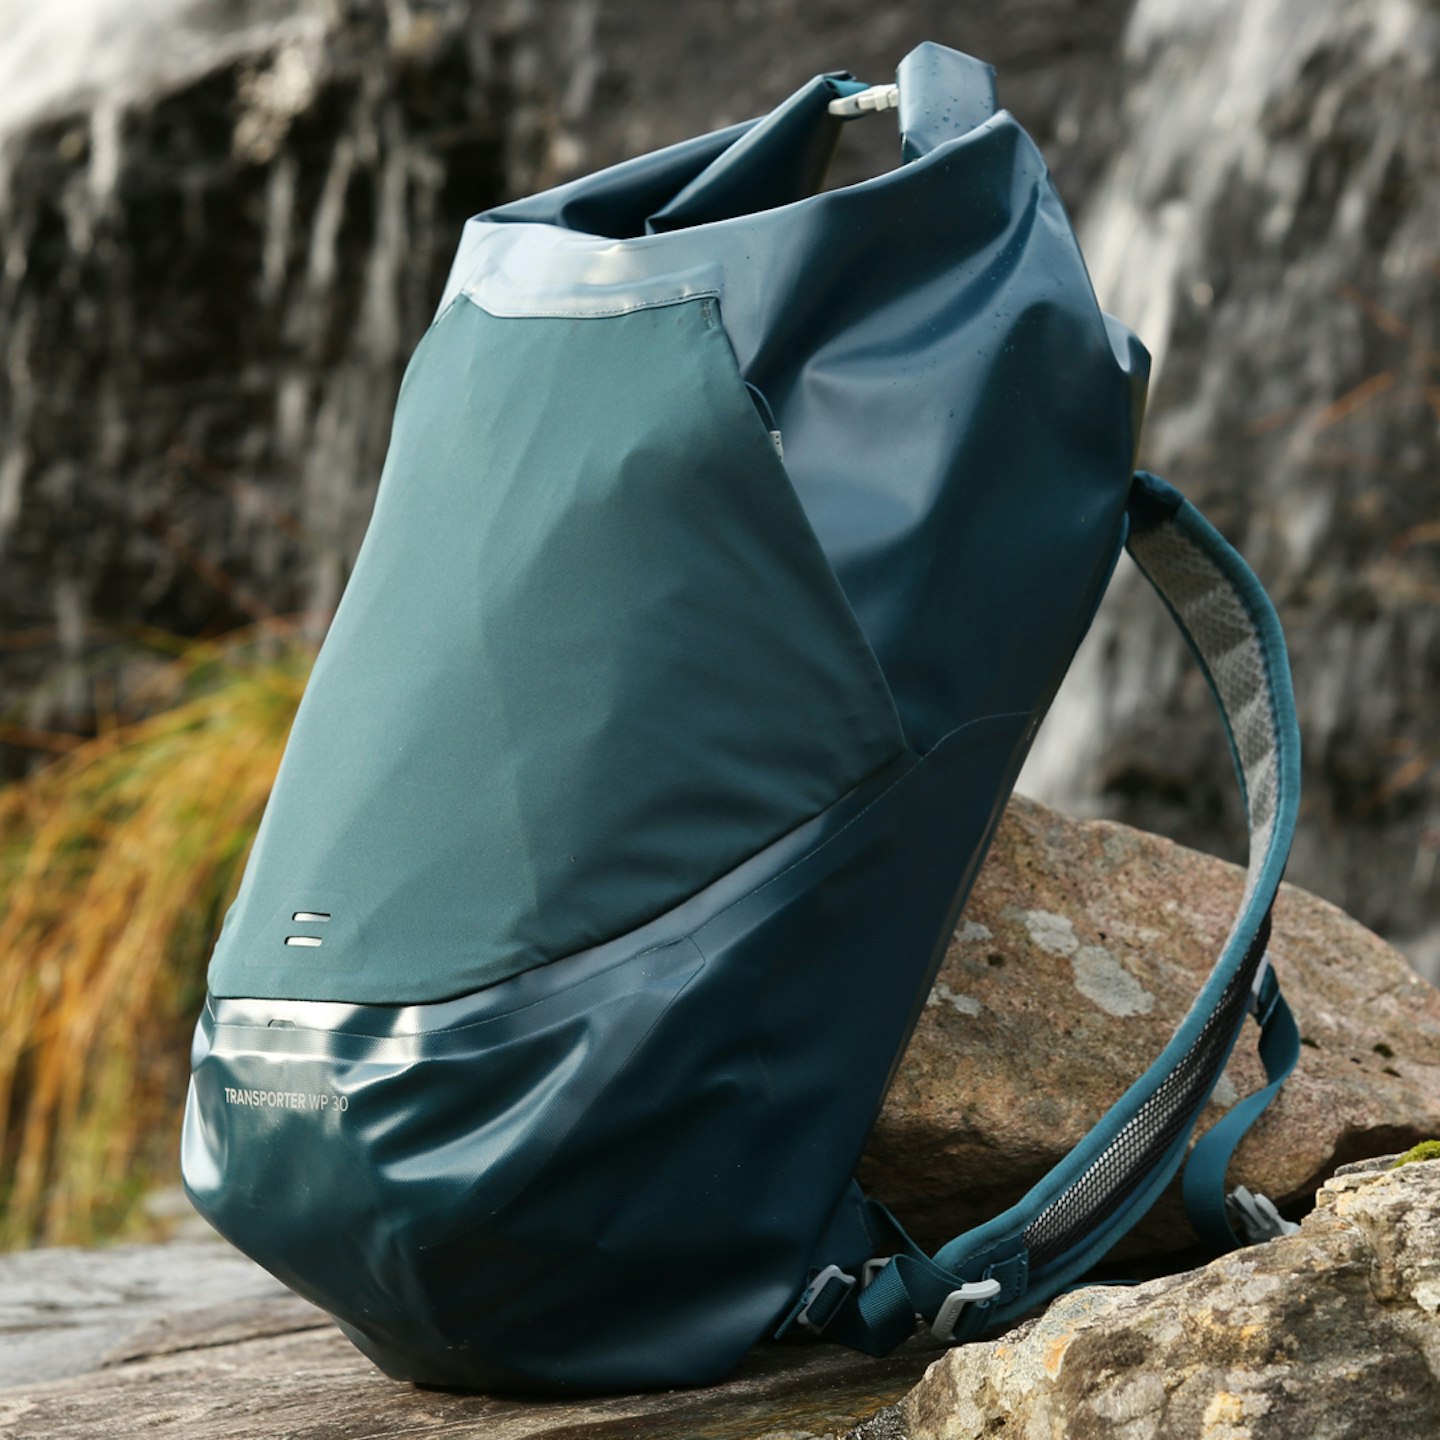 Osprey Transporter WP 30 waterproof backpack reviewed: Sturdy protection